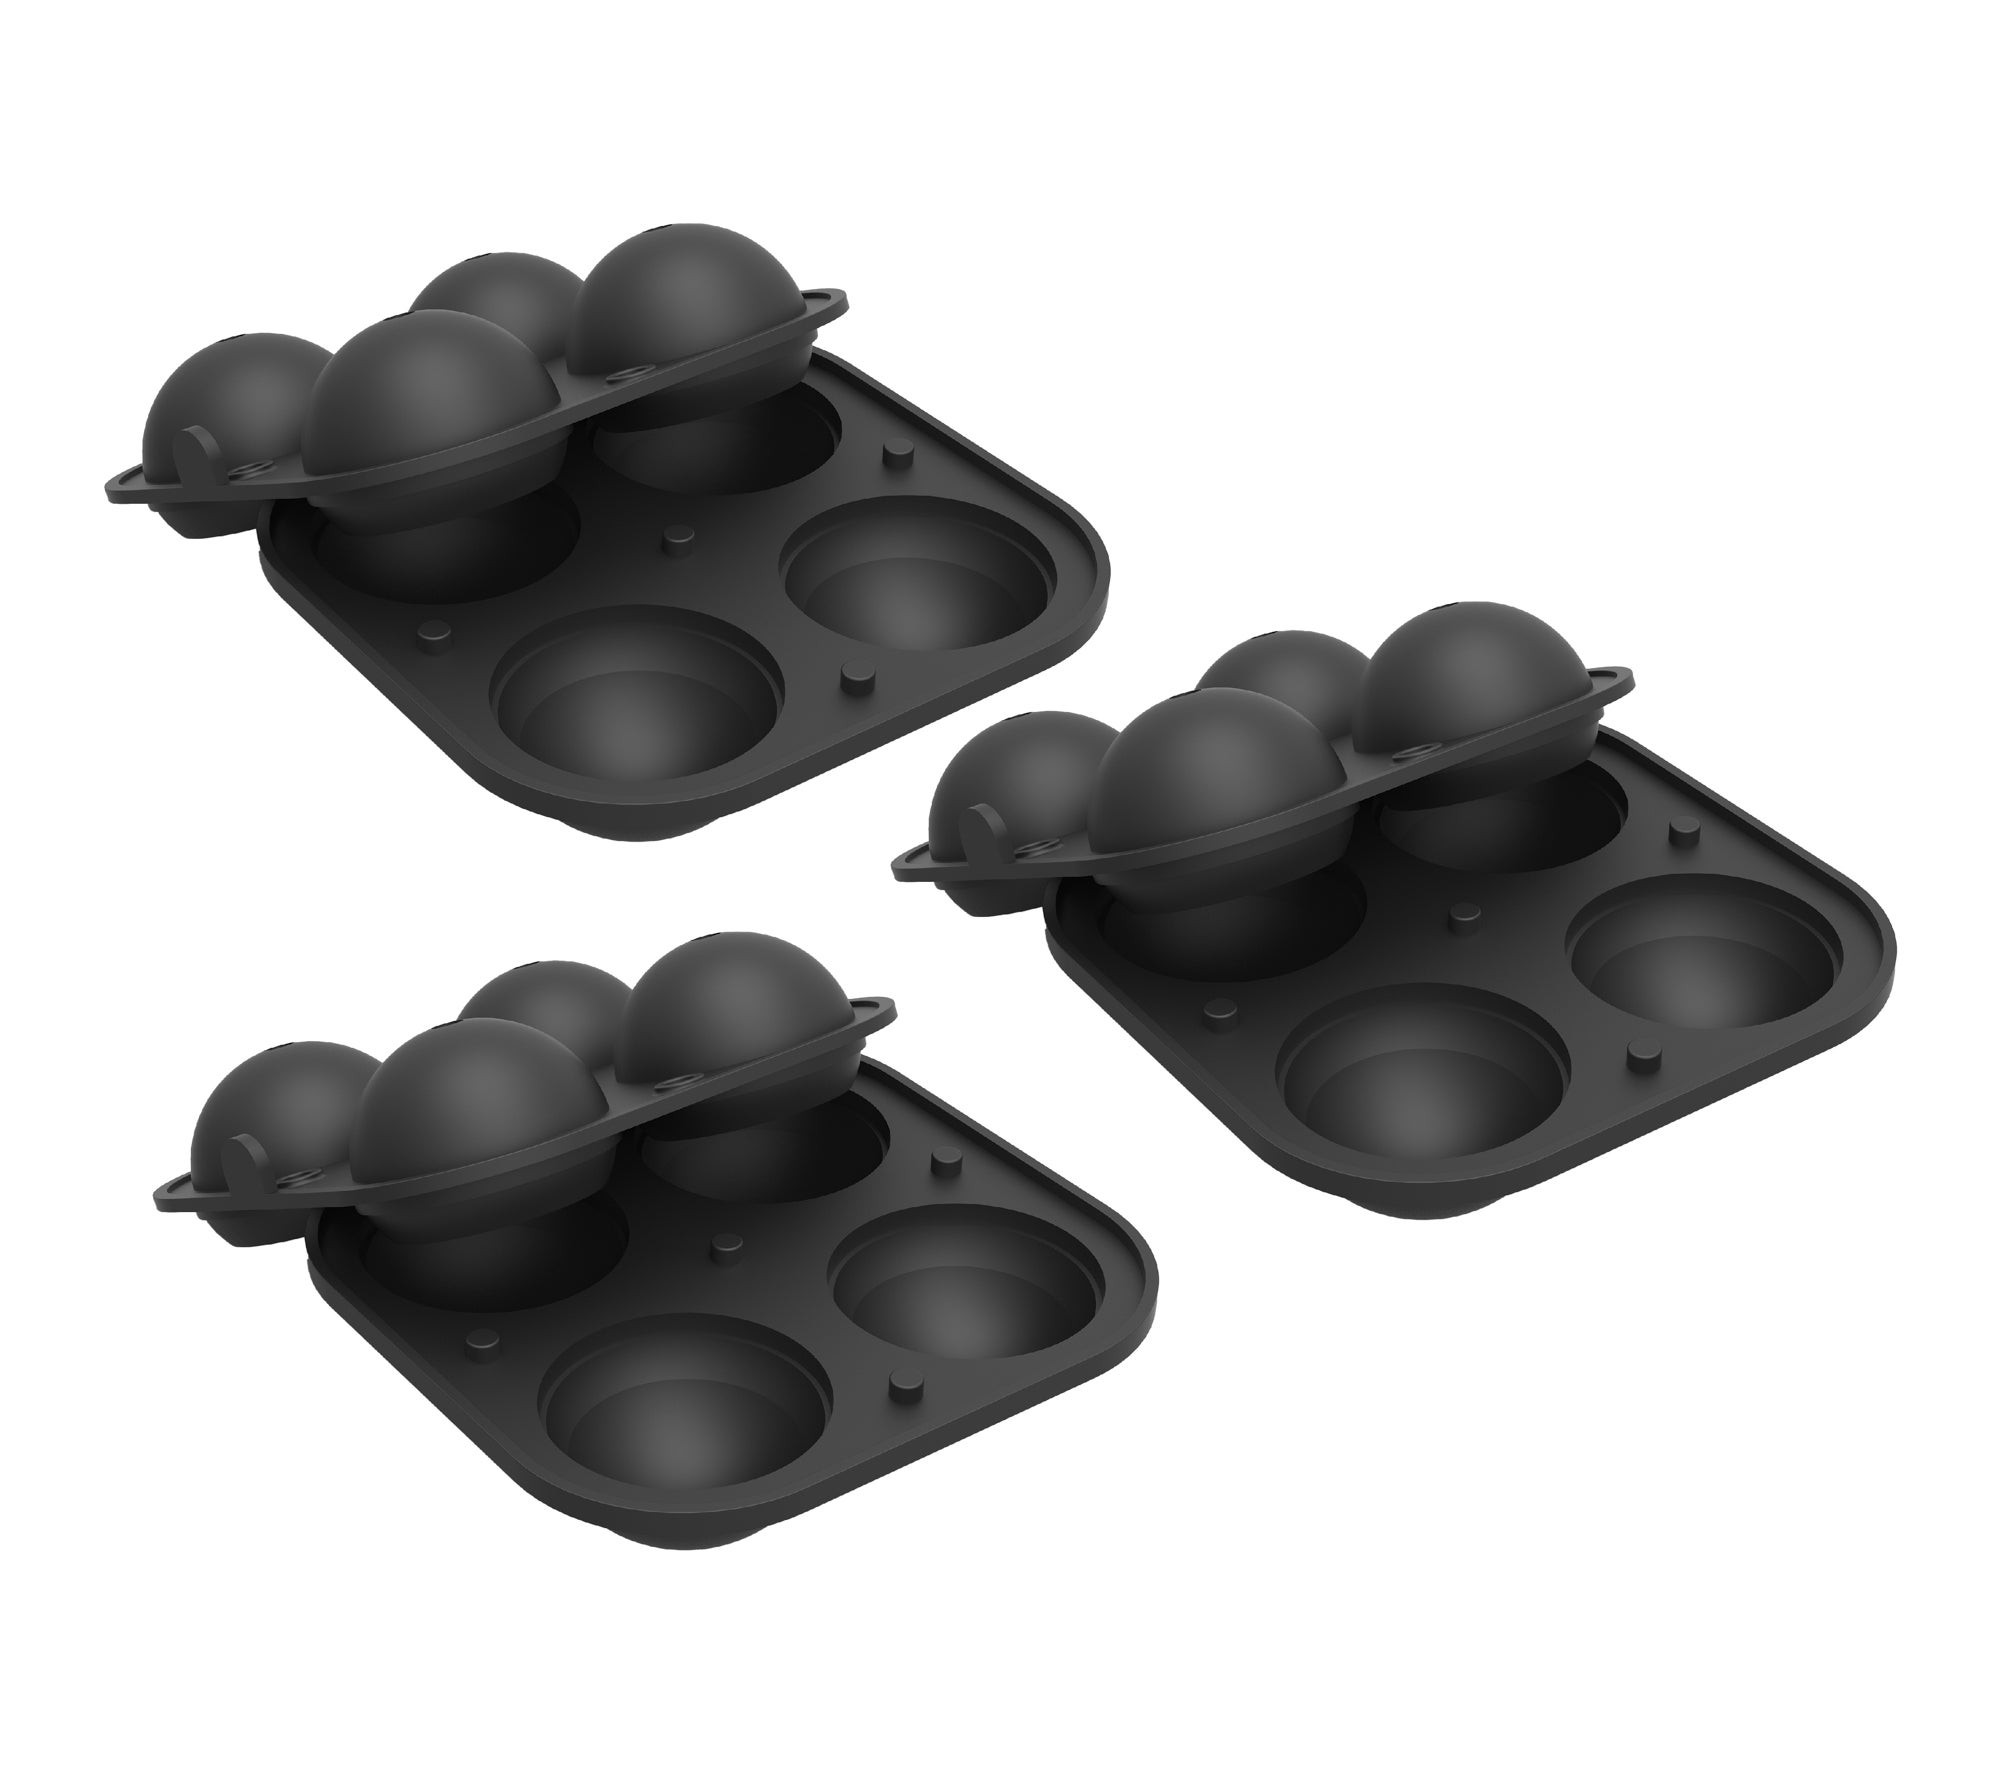 Sphere Ice Mold Set - 3-Pack Charcoal